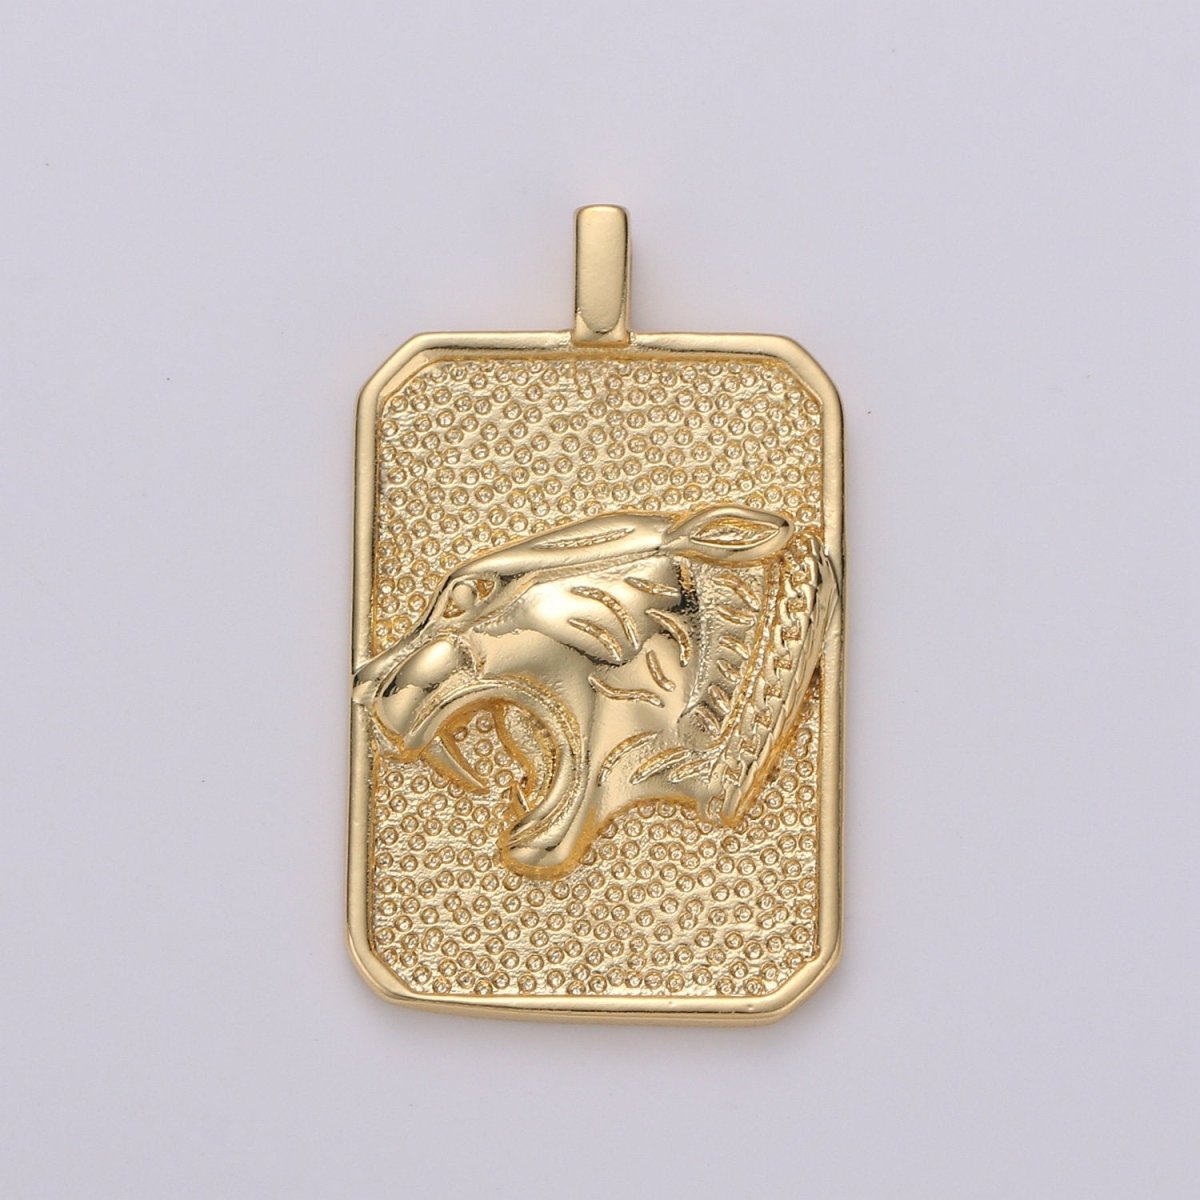 Gold Tag Cat Charm Gold Filled Medallion, Thunder Cat Pendant Animal Necklace Charm for Statement Necklace Component Men Unisex Jewelry J-027 - DLUXCA